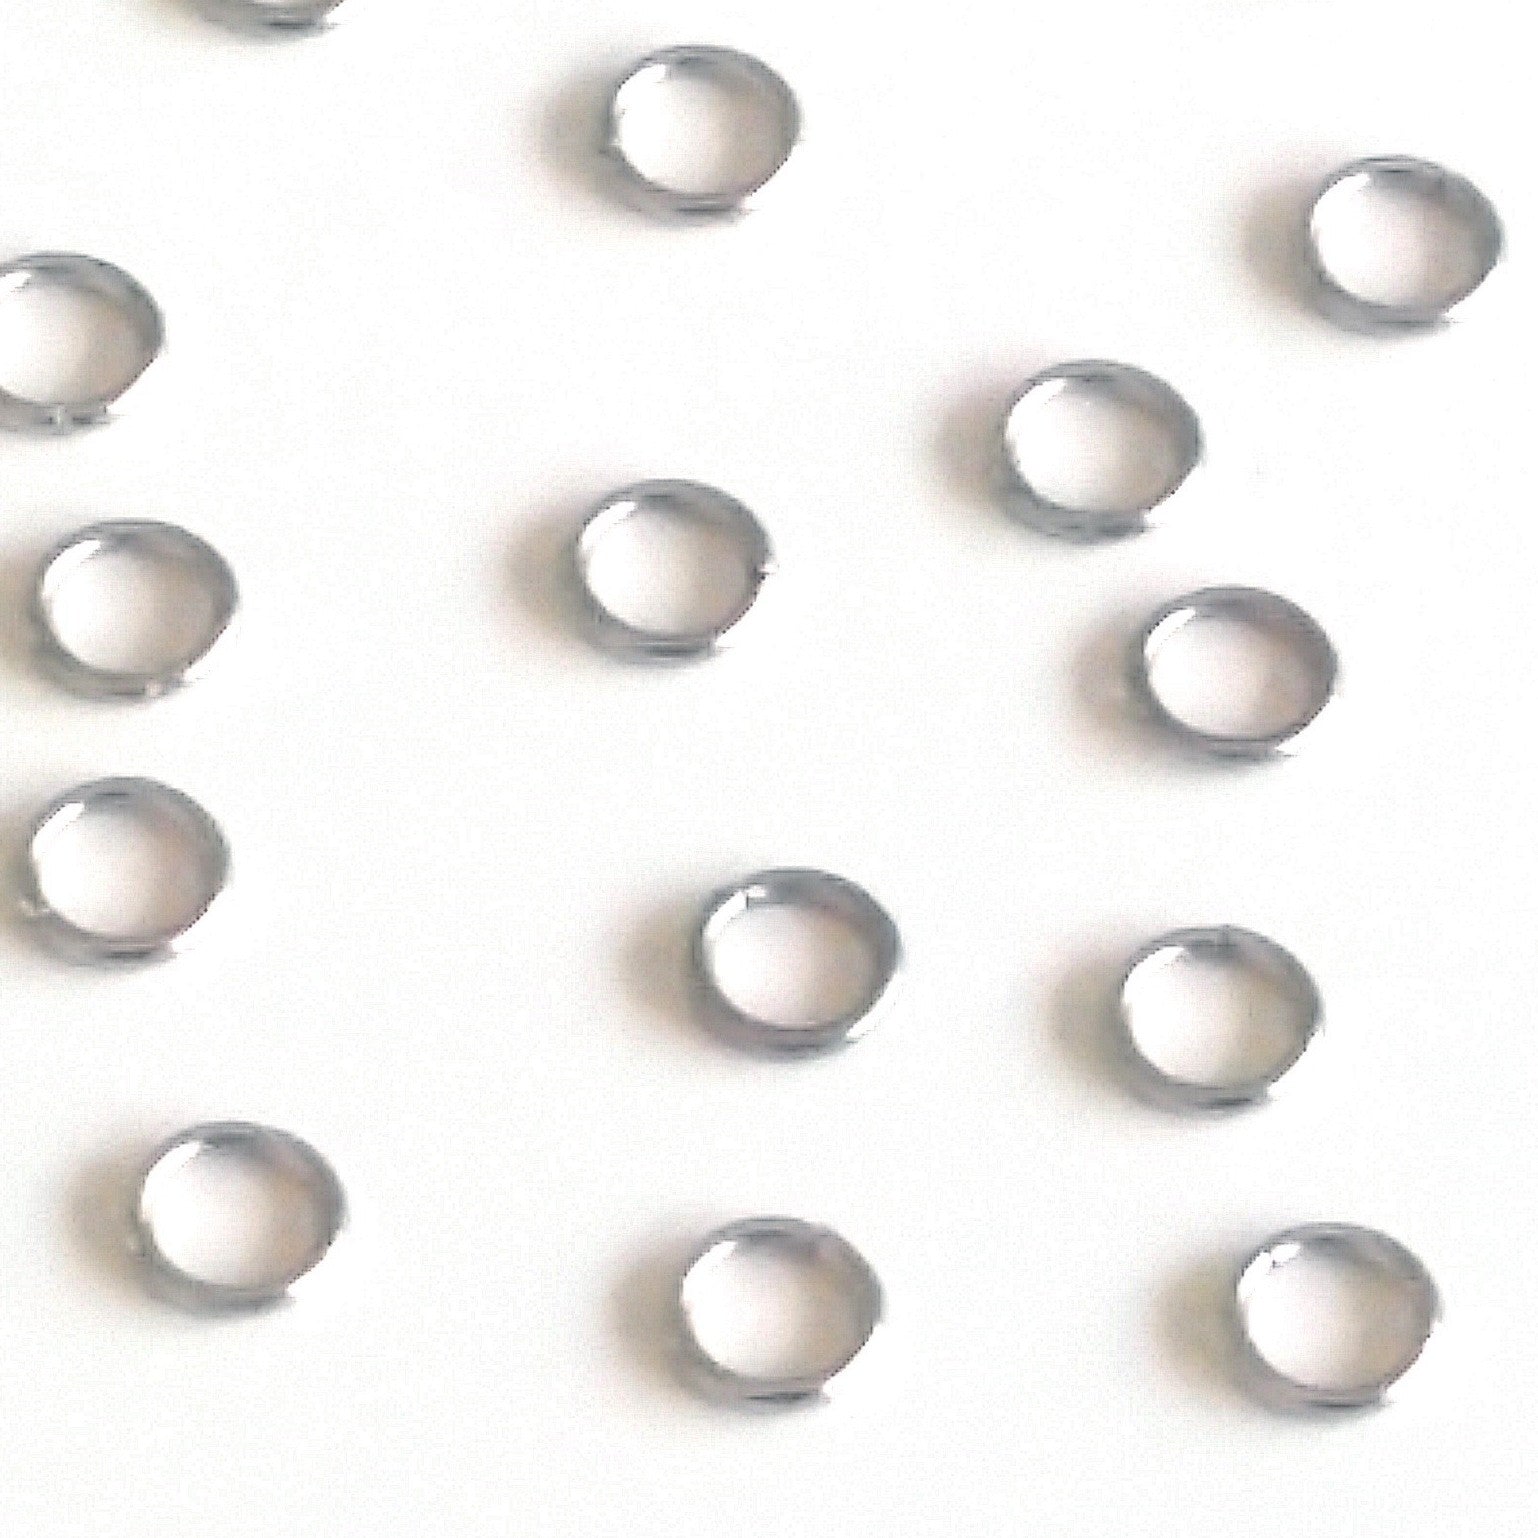 Very Thin Jump Rings, 4mm outside diameter, 0.6mm thick, Stainless Ste -  Jewelry Tool Box